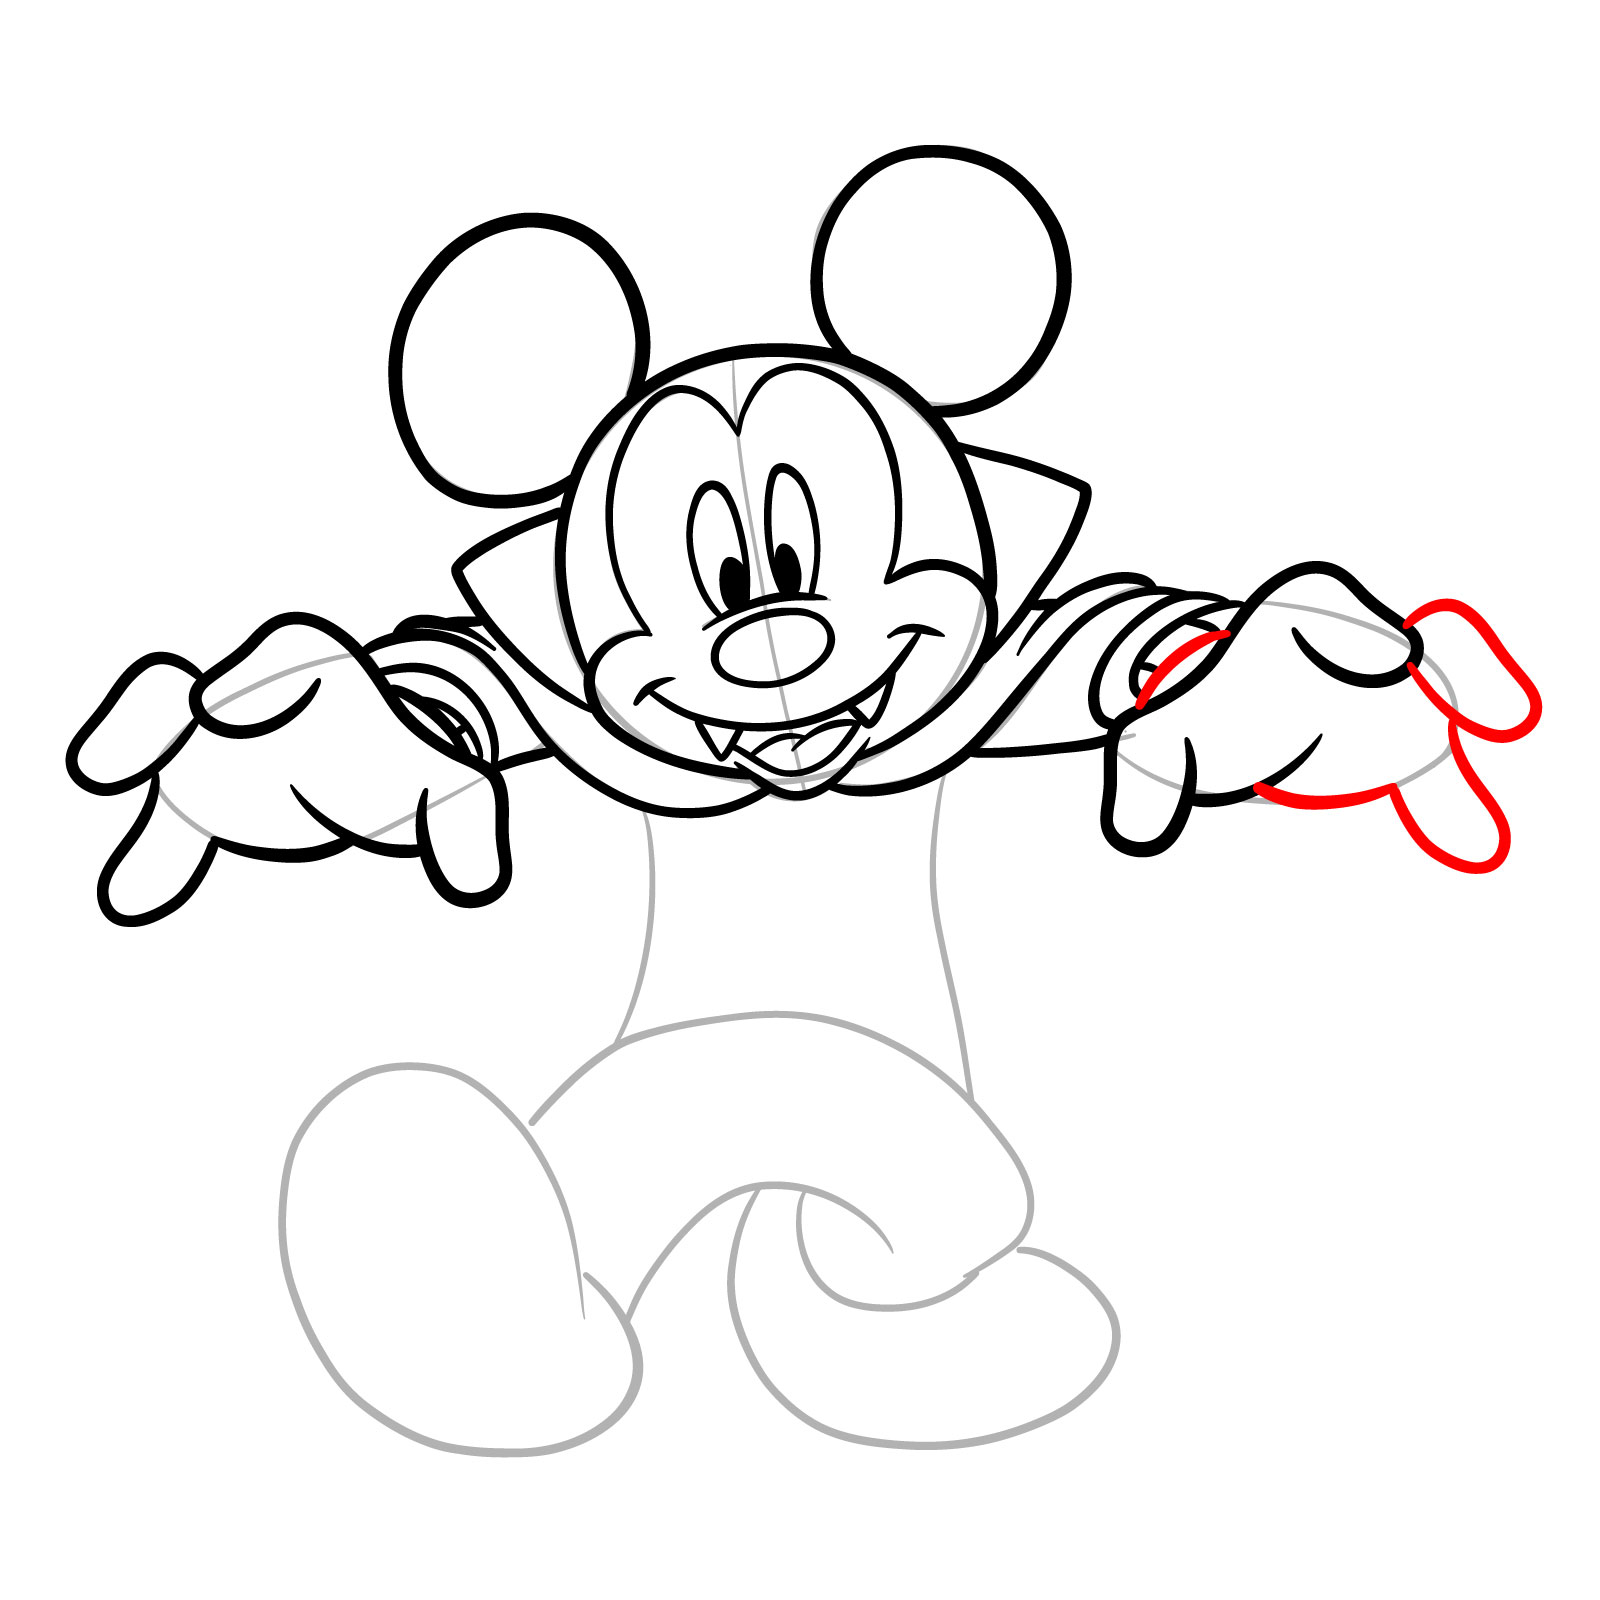 How to draw Dracula Mickey Mouse - step 18